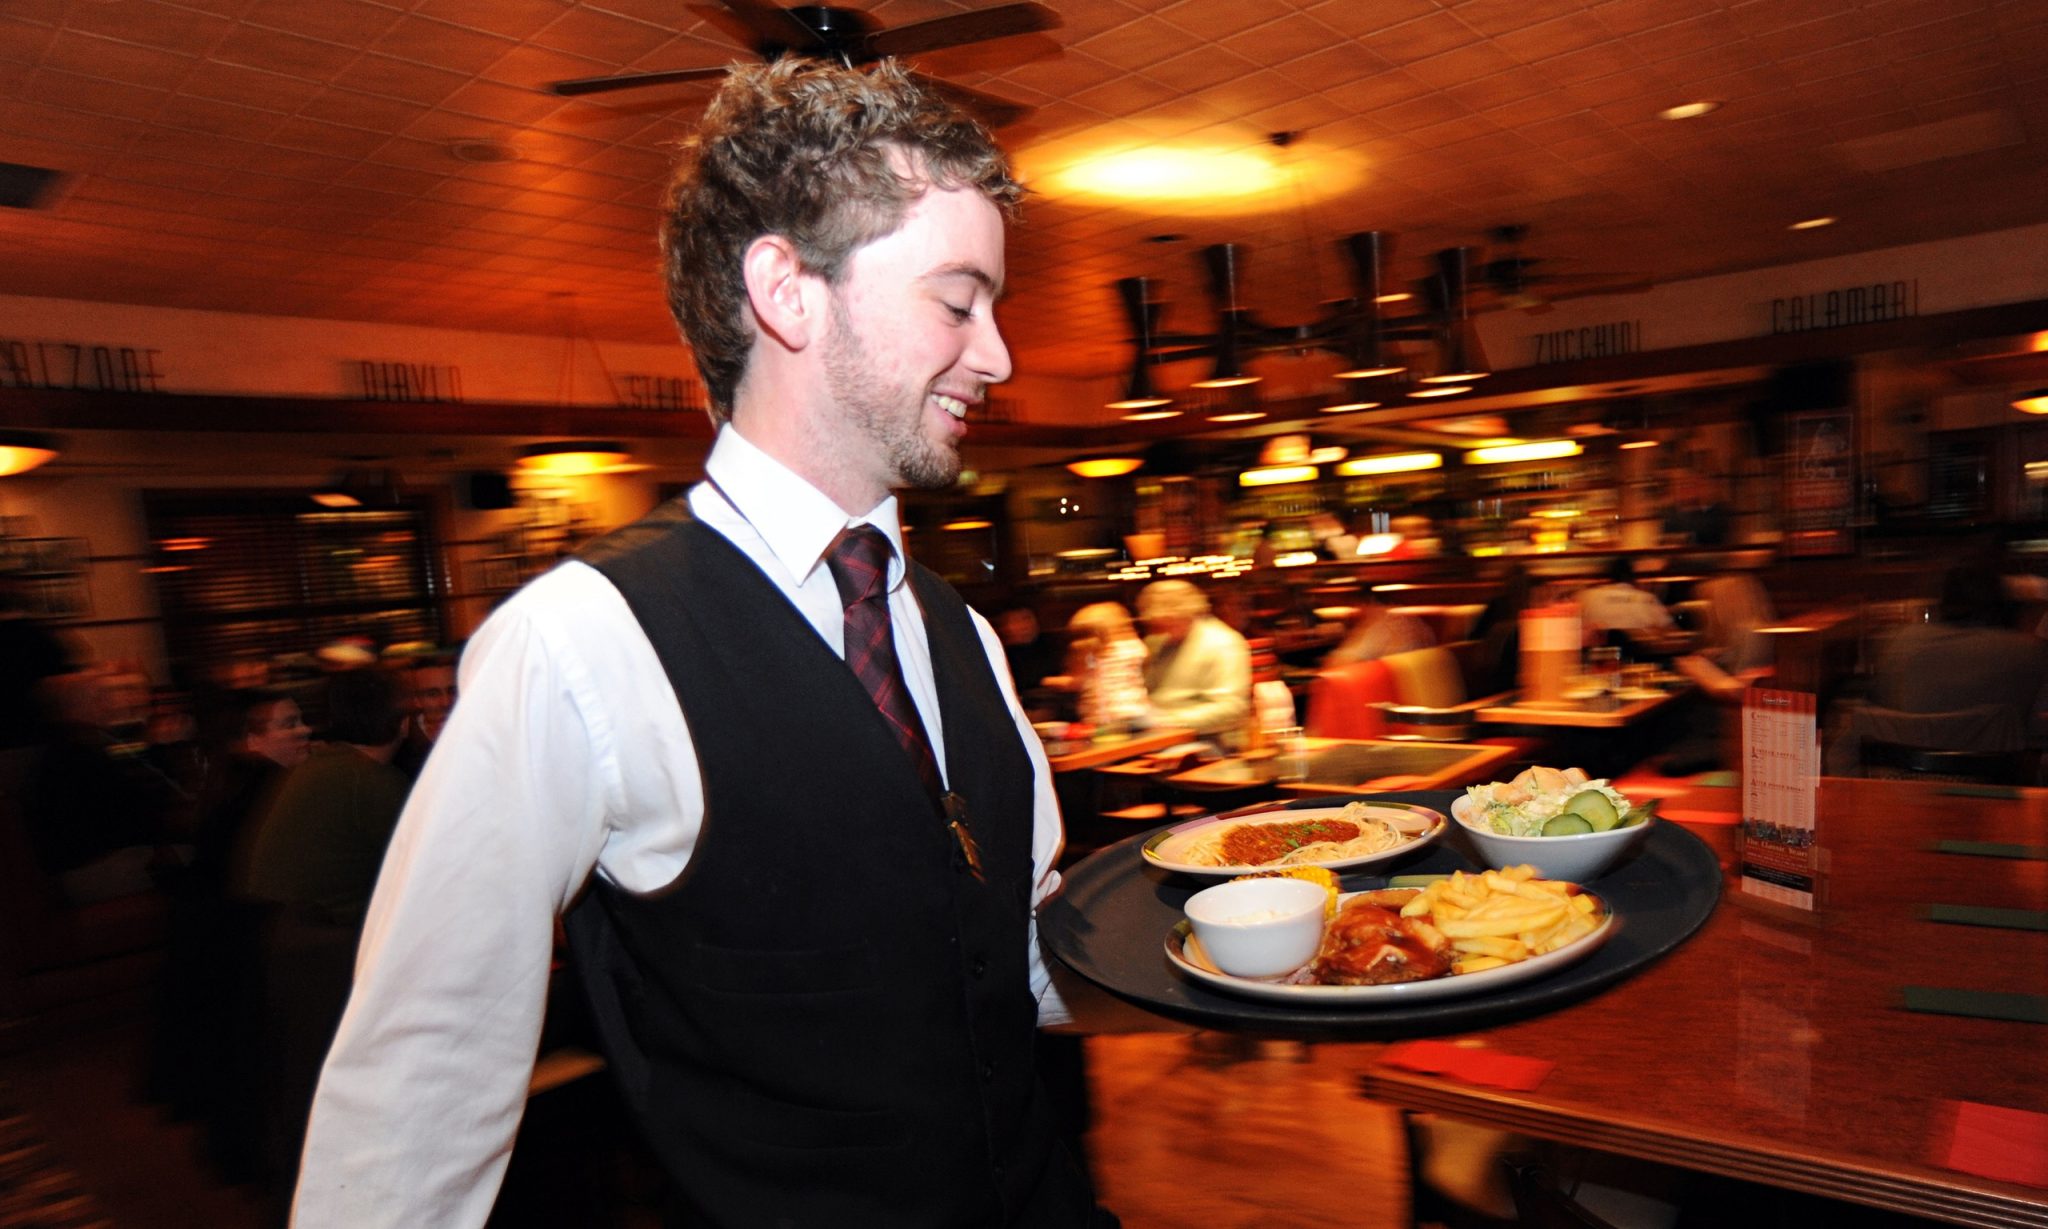 A waiter rushes with a tray of food in a busy restaurant Bradford West